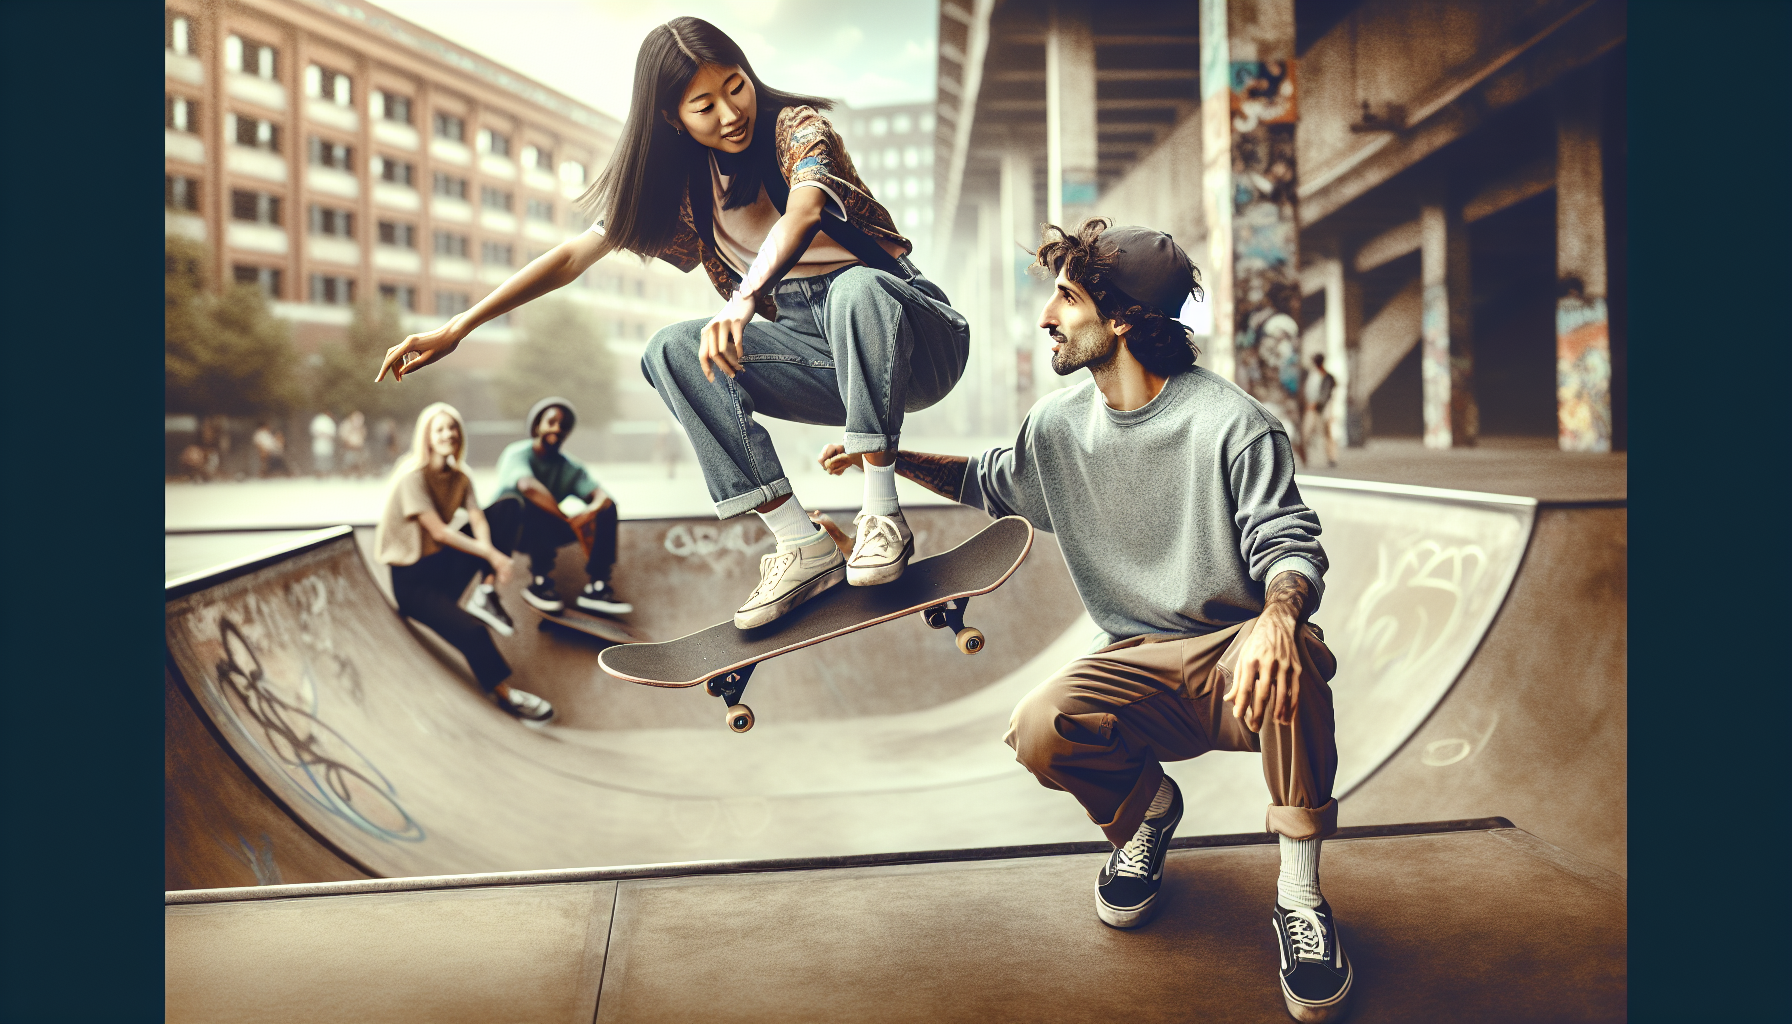 Can You Discuss The Role Of Peer Feedback And Coaching In Skateboarding Progression?